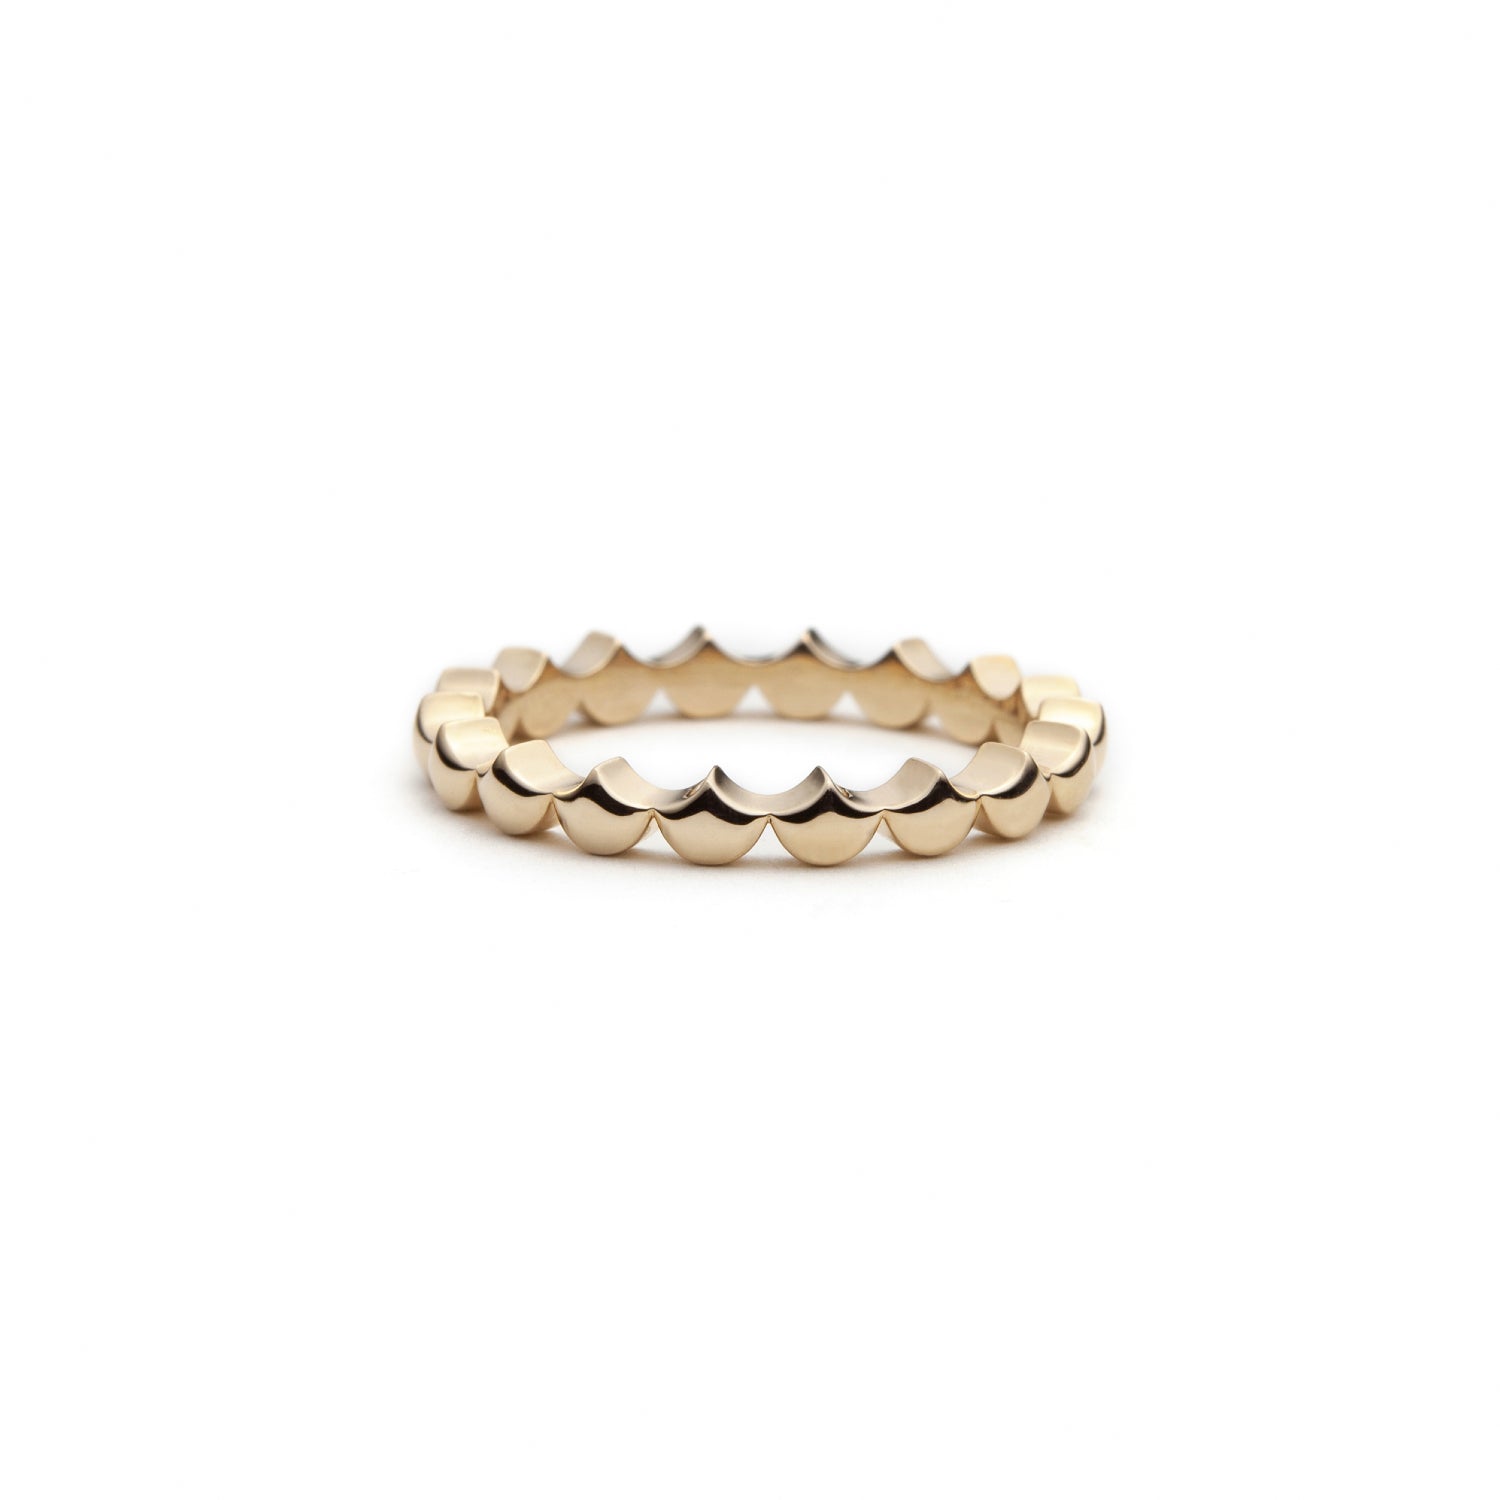 Lepia Mermaid Scales Motif Ring in Yellow Gold